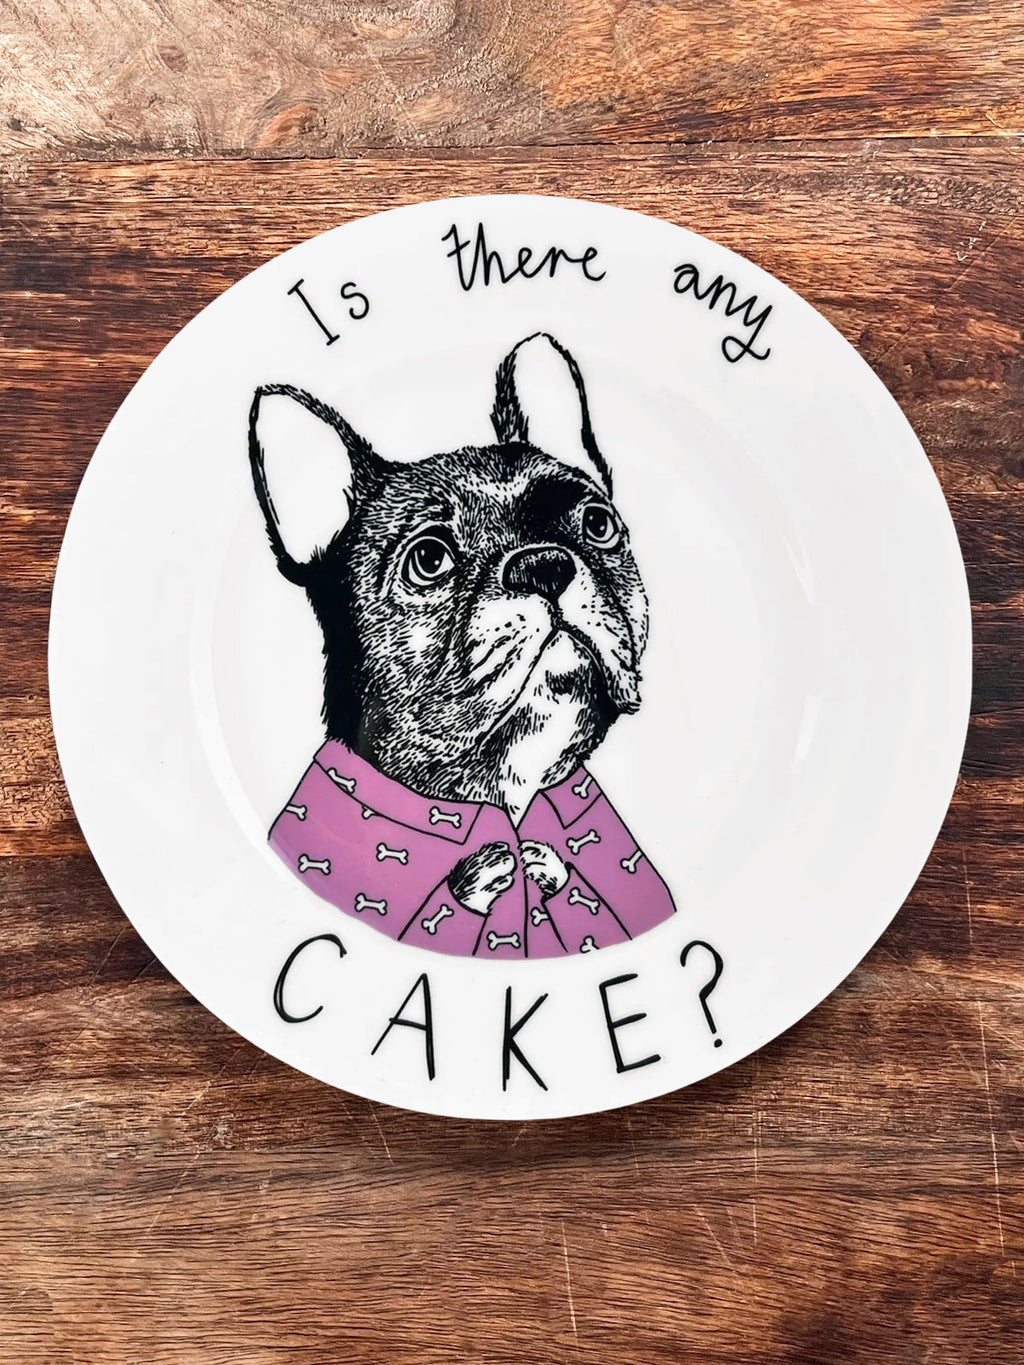 JimBobArt Side Plate - Is there any cake?